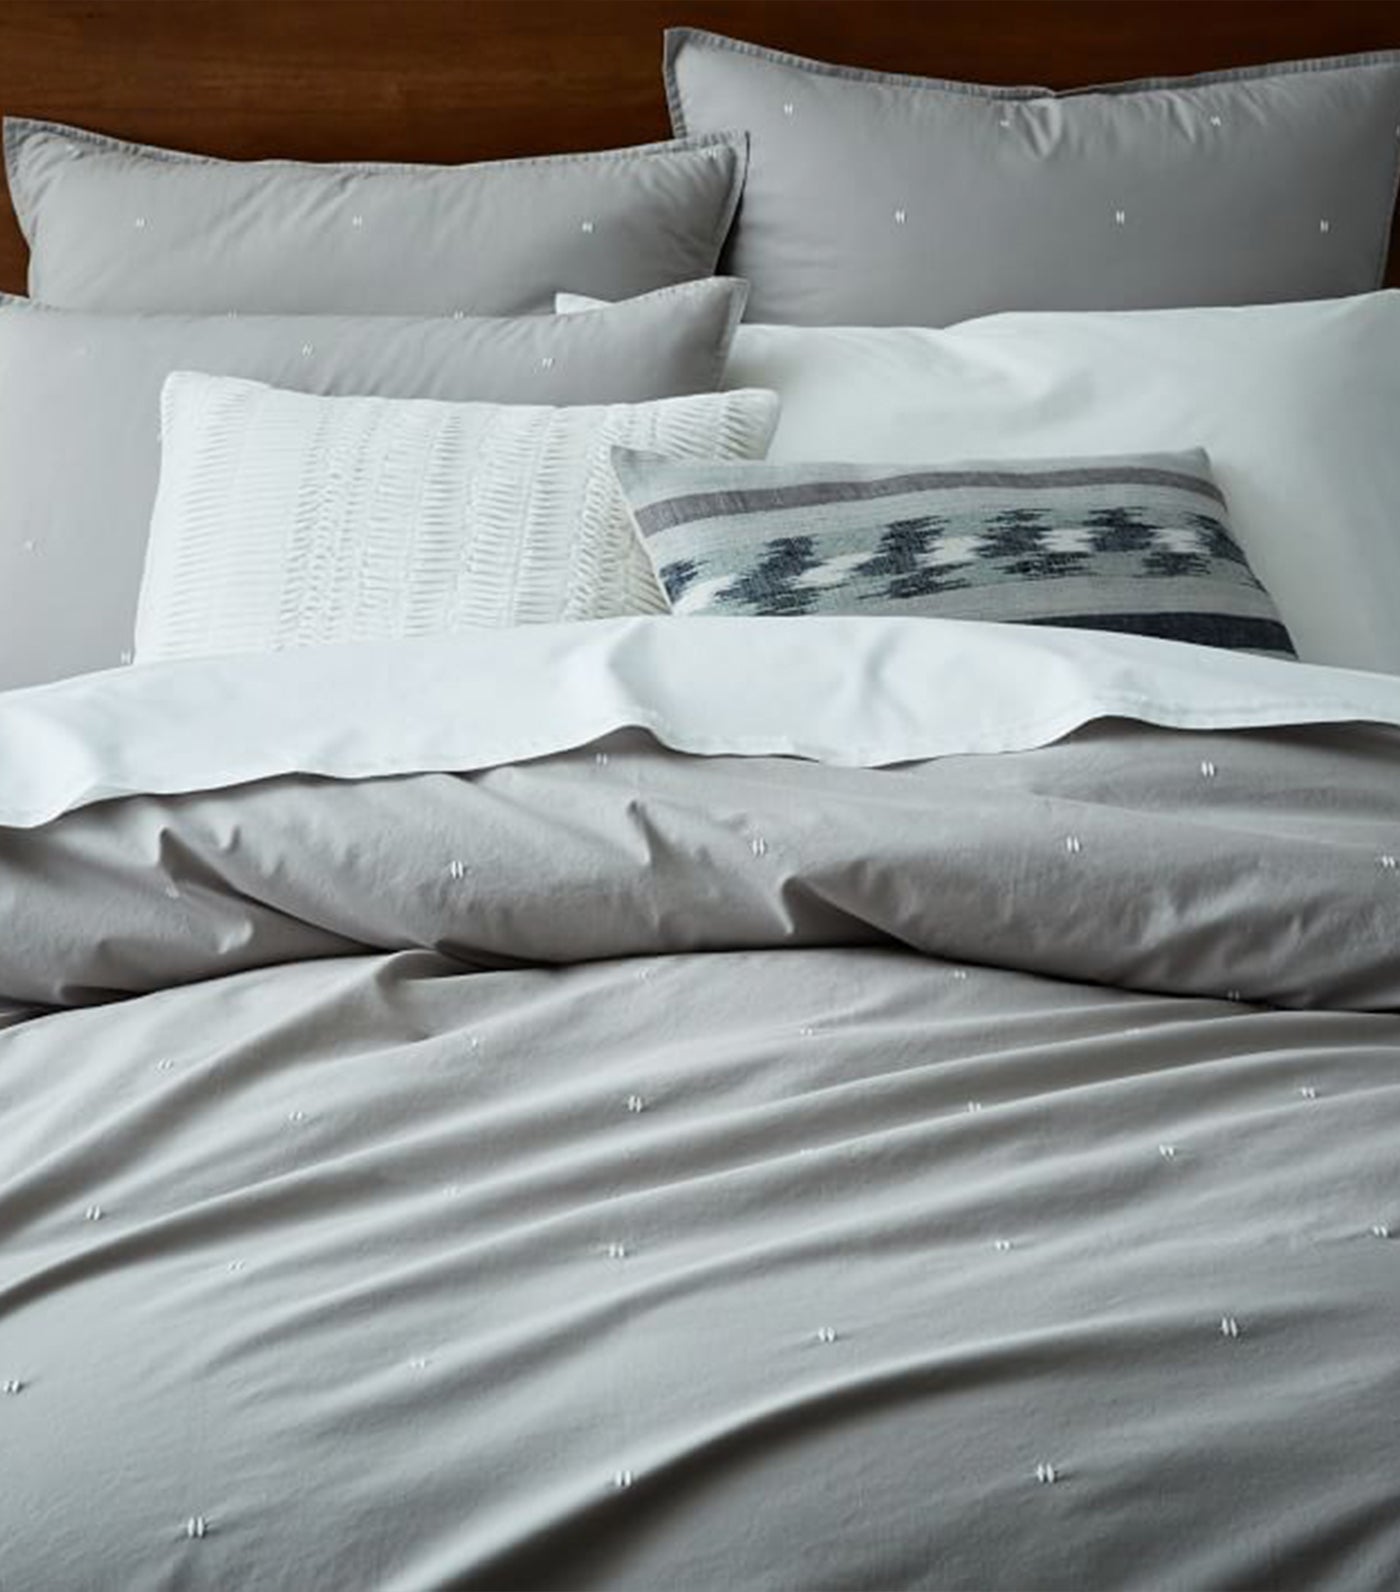 west elm Organic Washed Cotton Percale Duvet Cover, King - Platinum